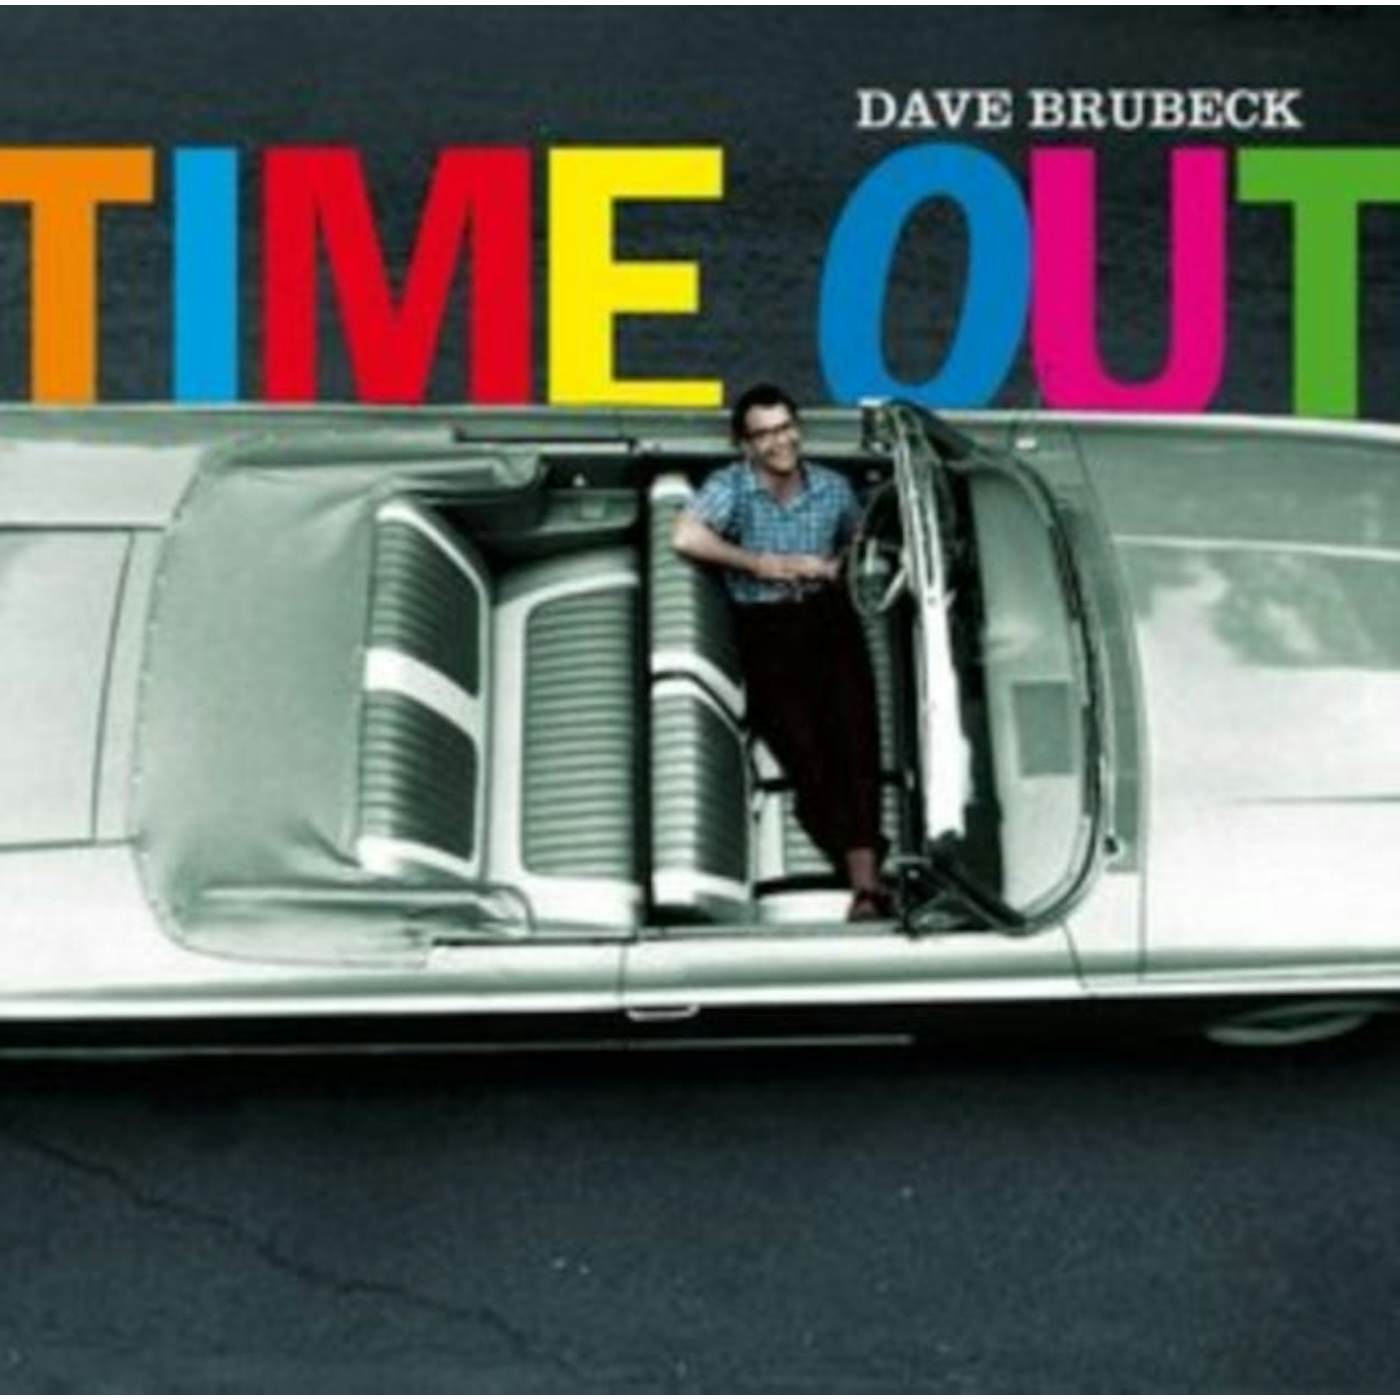 Dave Brubeck CD - Time Out +Bonus Album: Countdown / Time In Outer Space